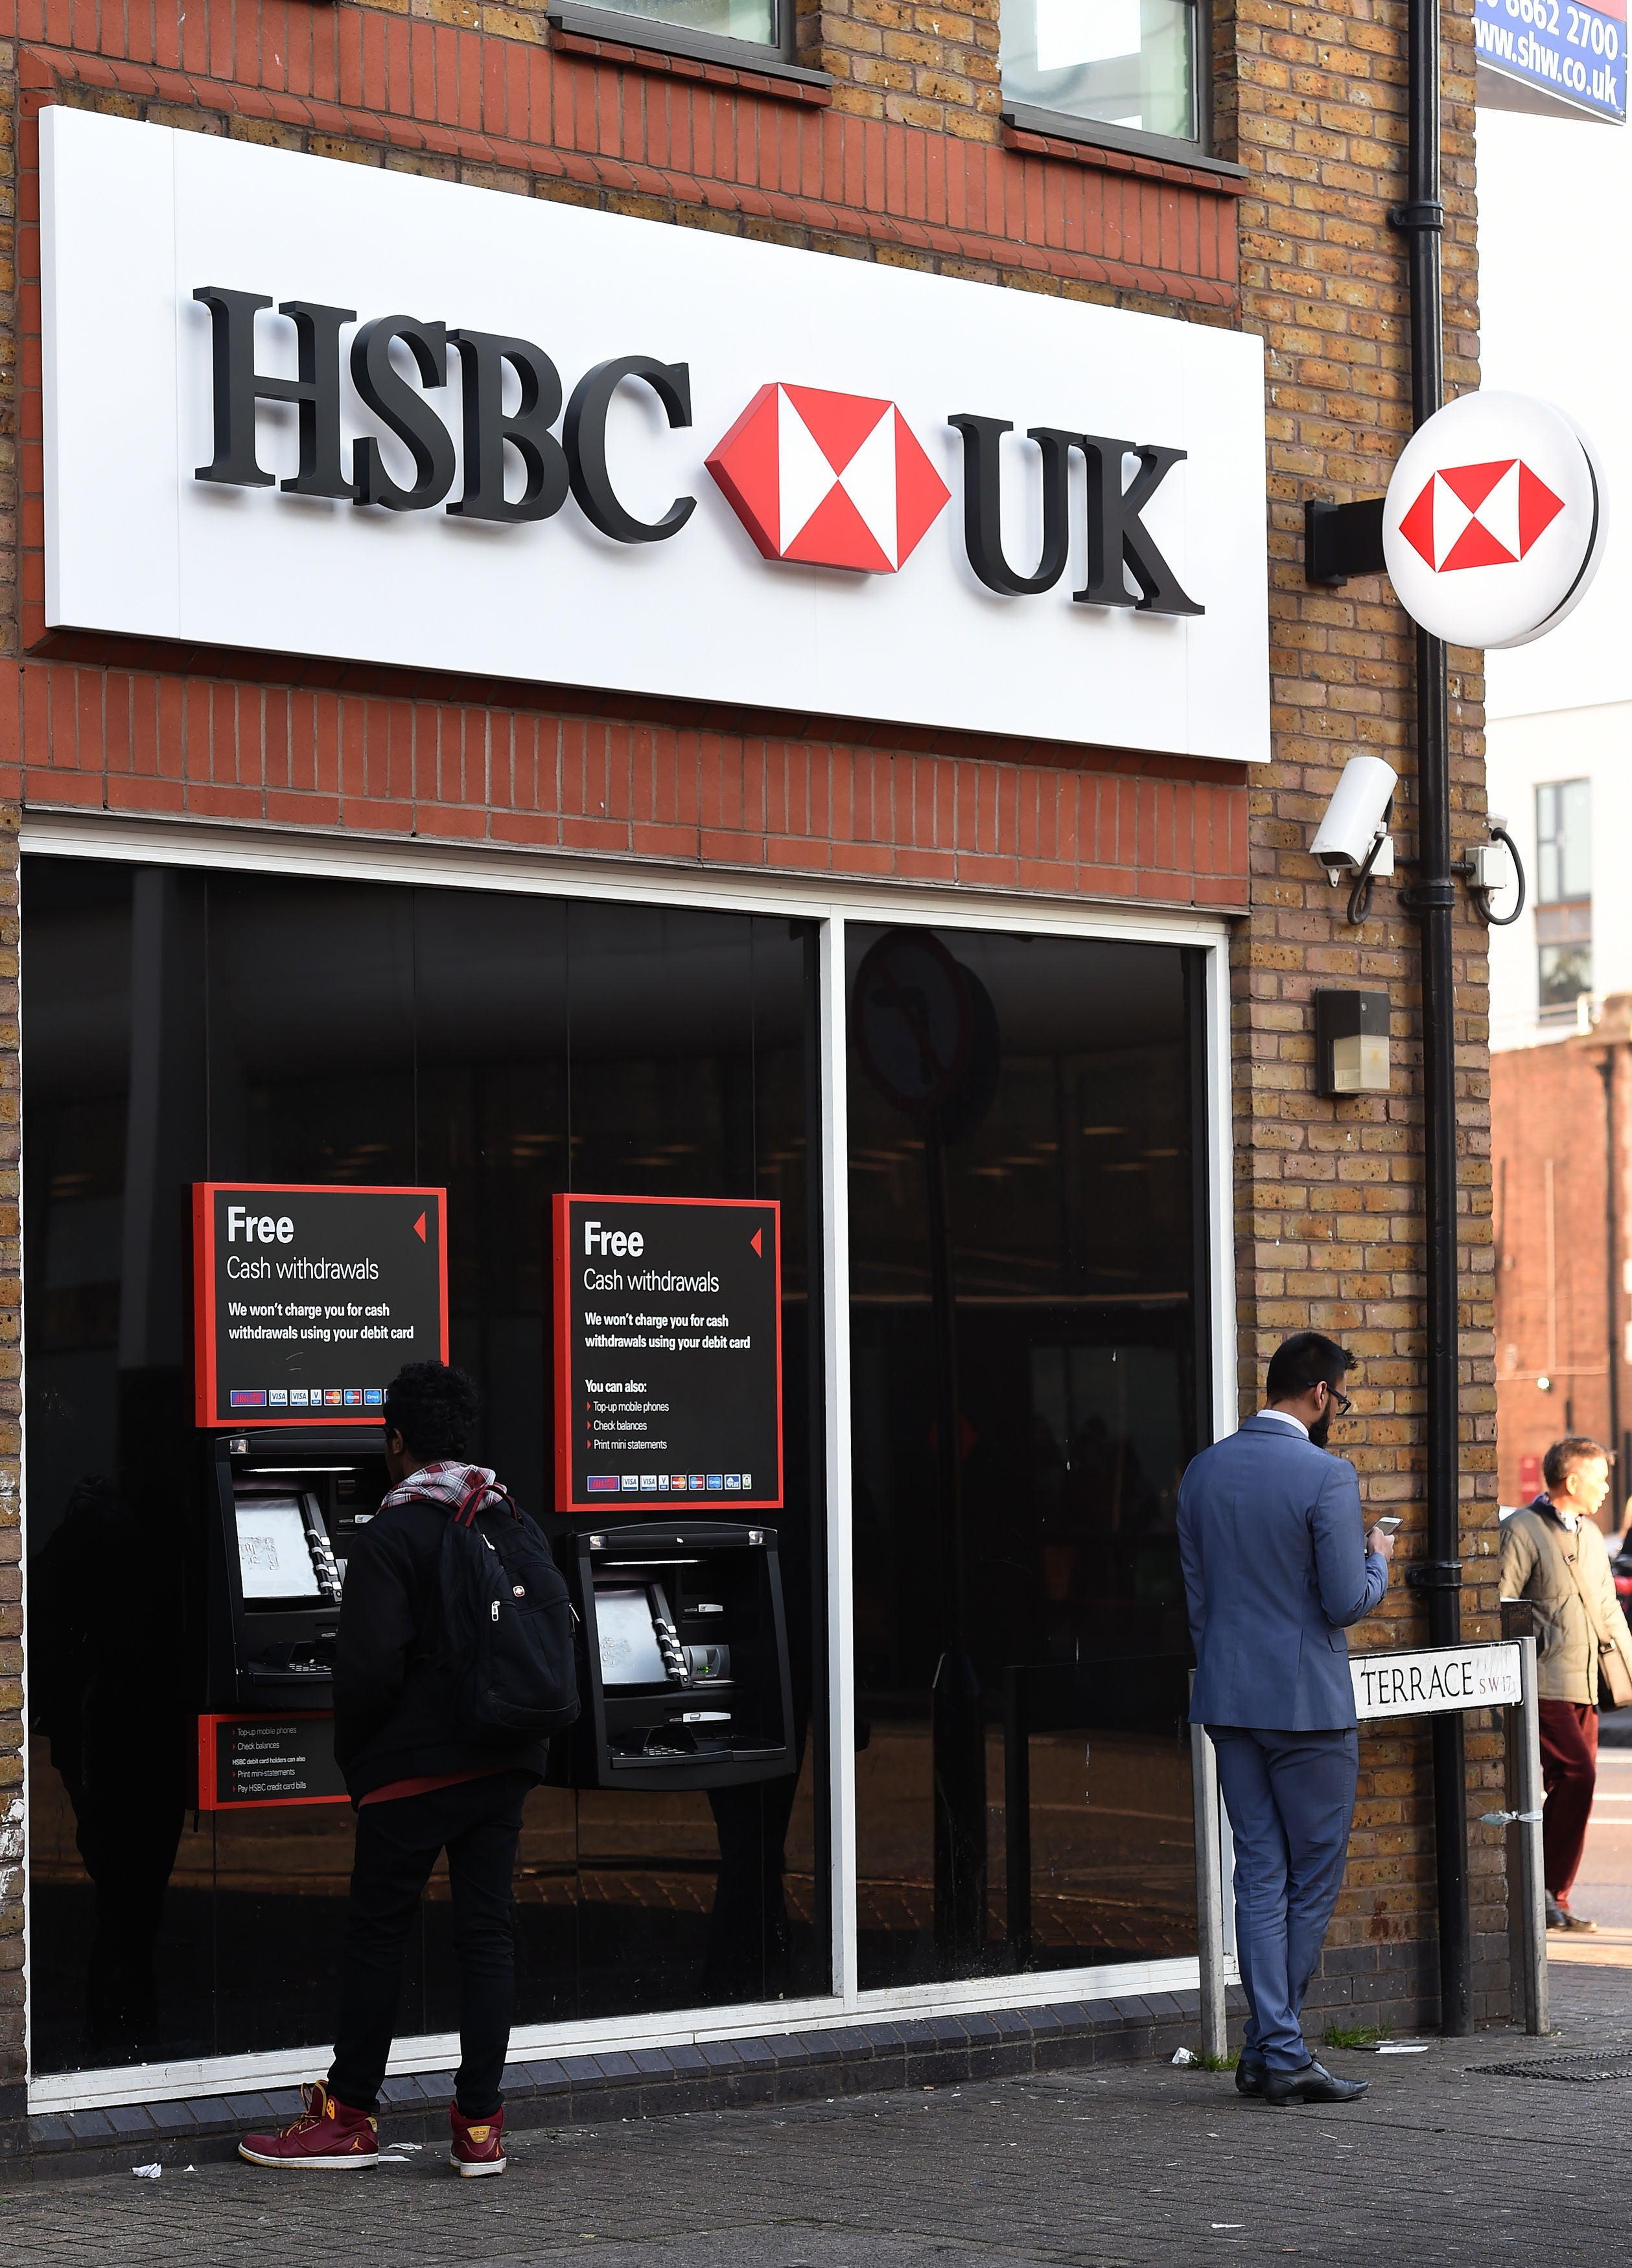 Purchase scams, impersonation scams and investment scams are the three most common types of fraud that HSBC UK has reported seeing recently (Charlotte Ball/PA)